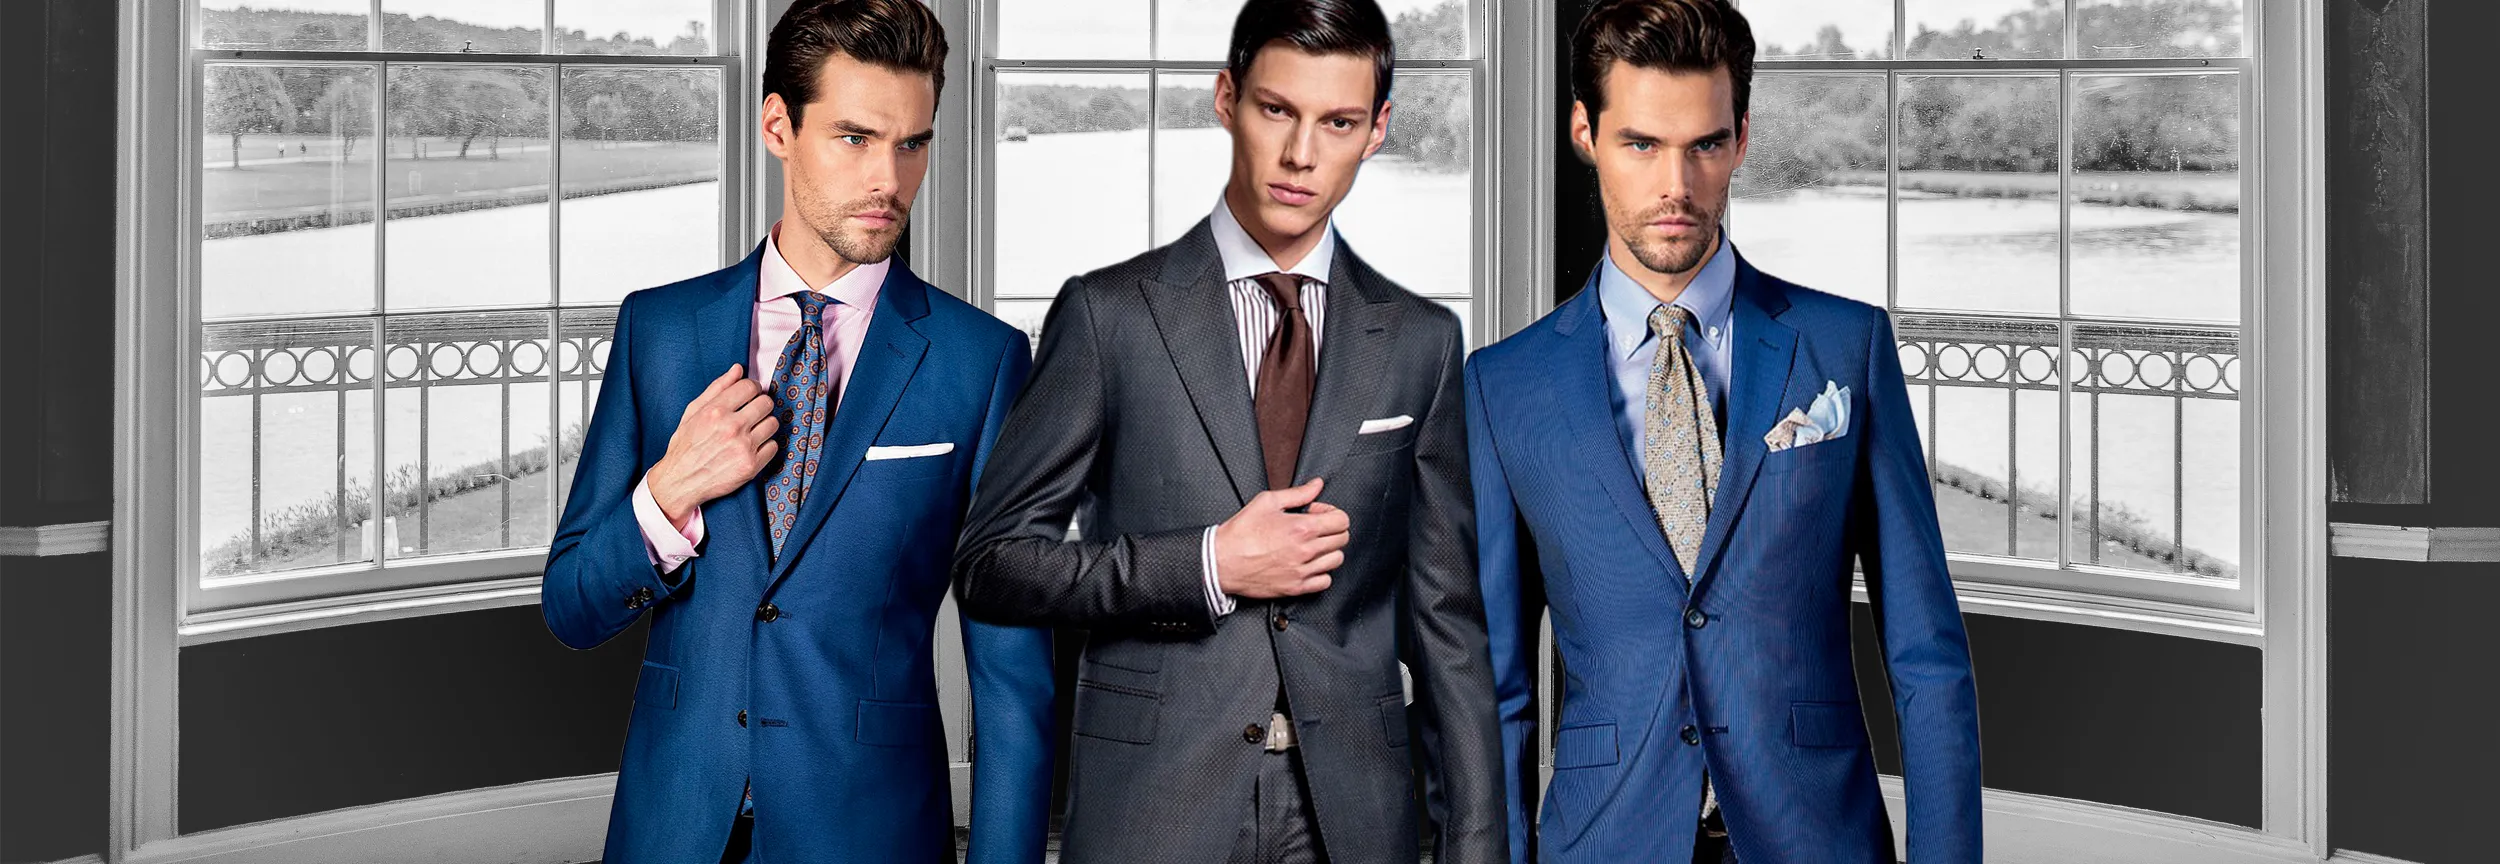 Everything a modern gentleman needs to know about how a perfect suit fits |  Business Insider India